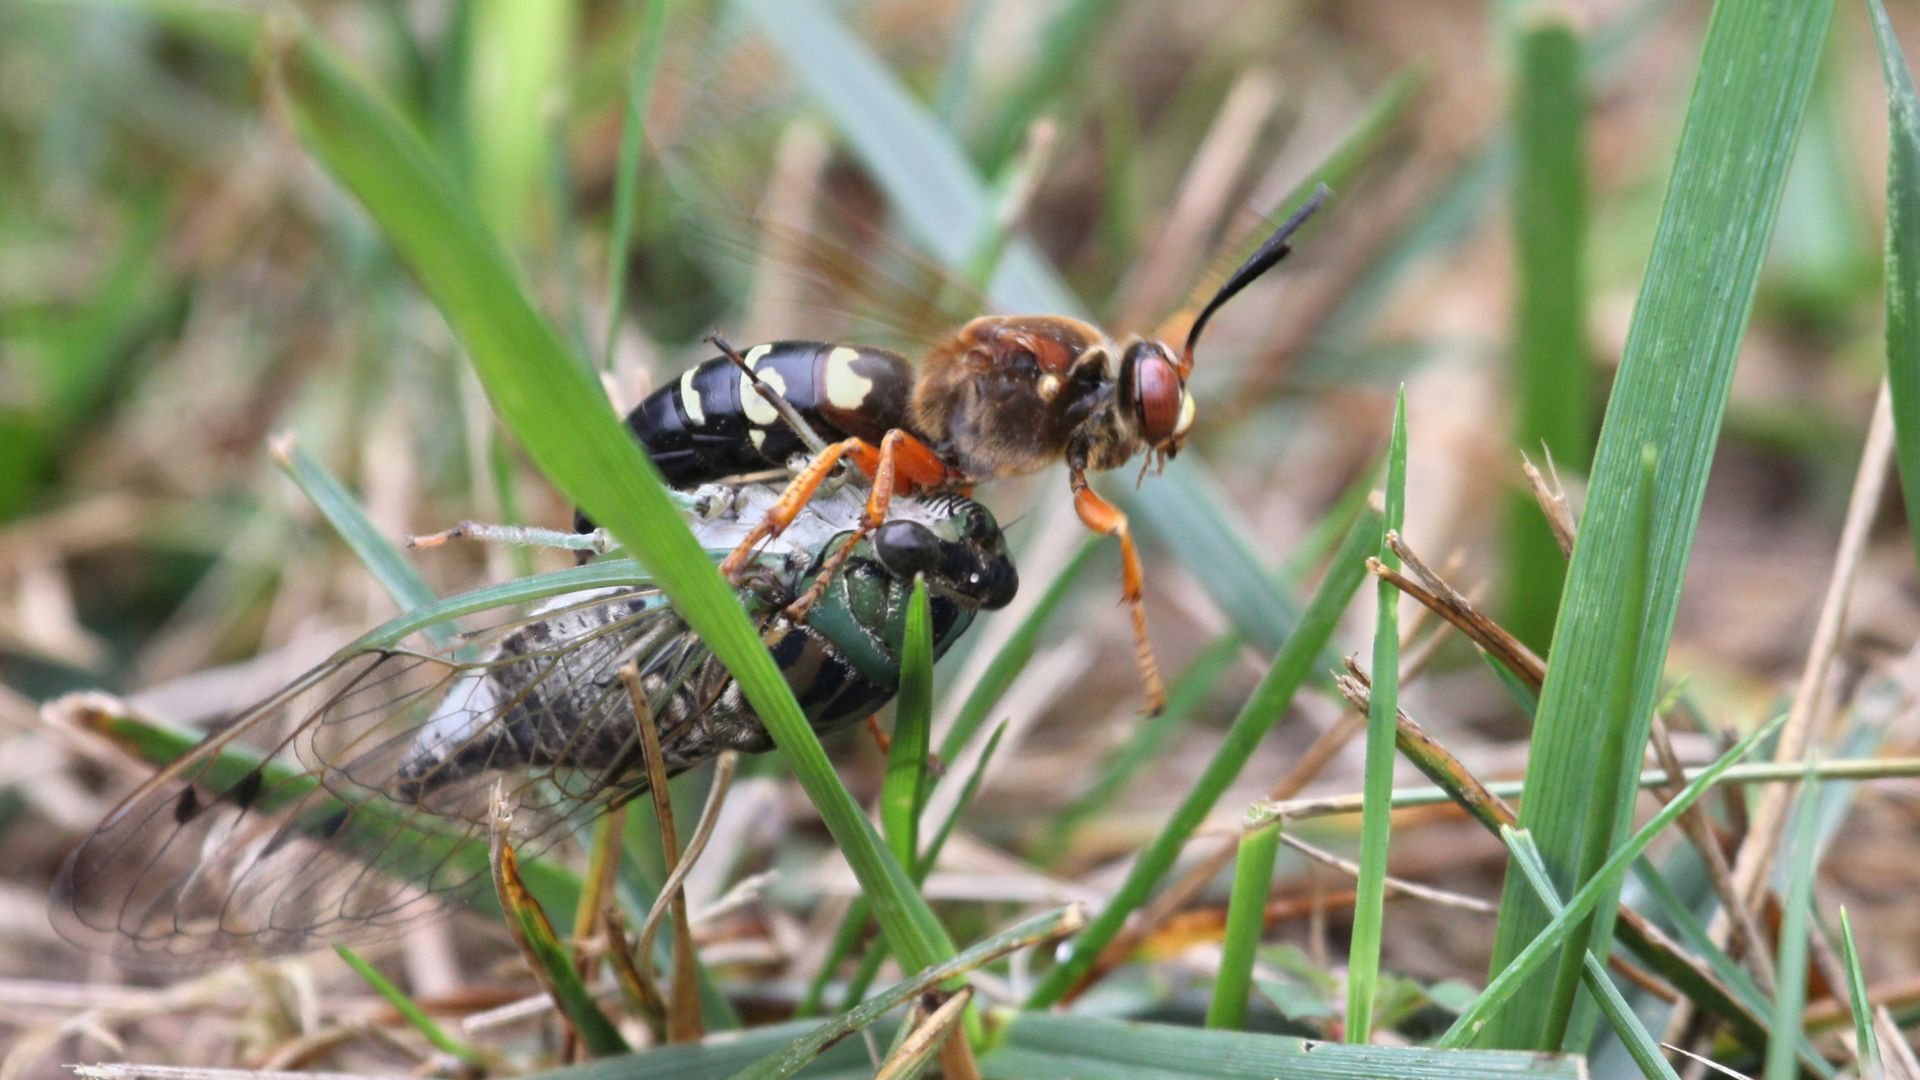 An image of a cicada killer wasp taking a paralyzed cicada back to its nest.